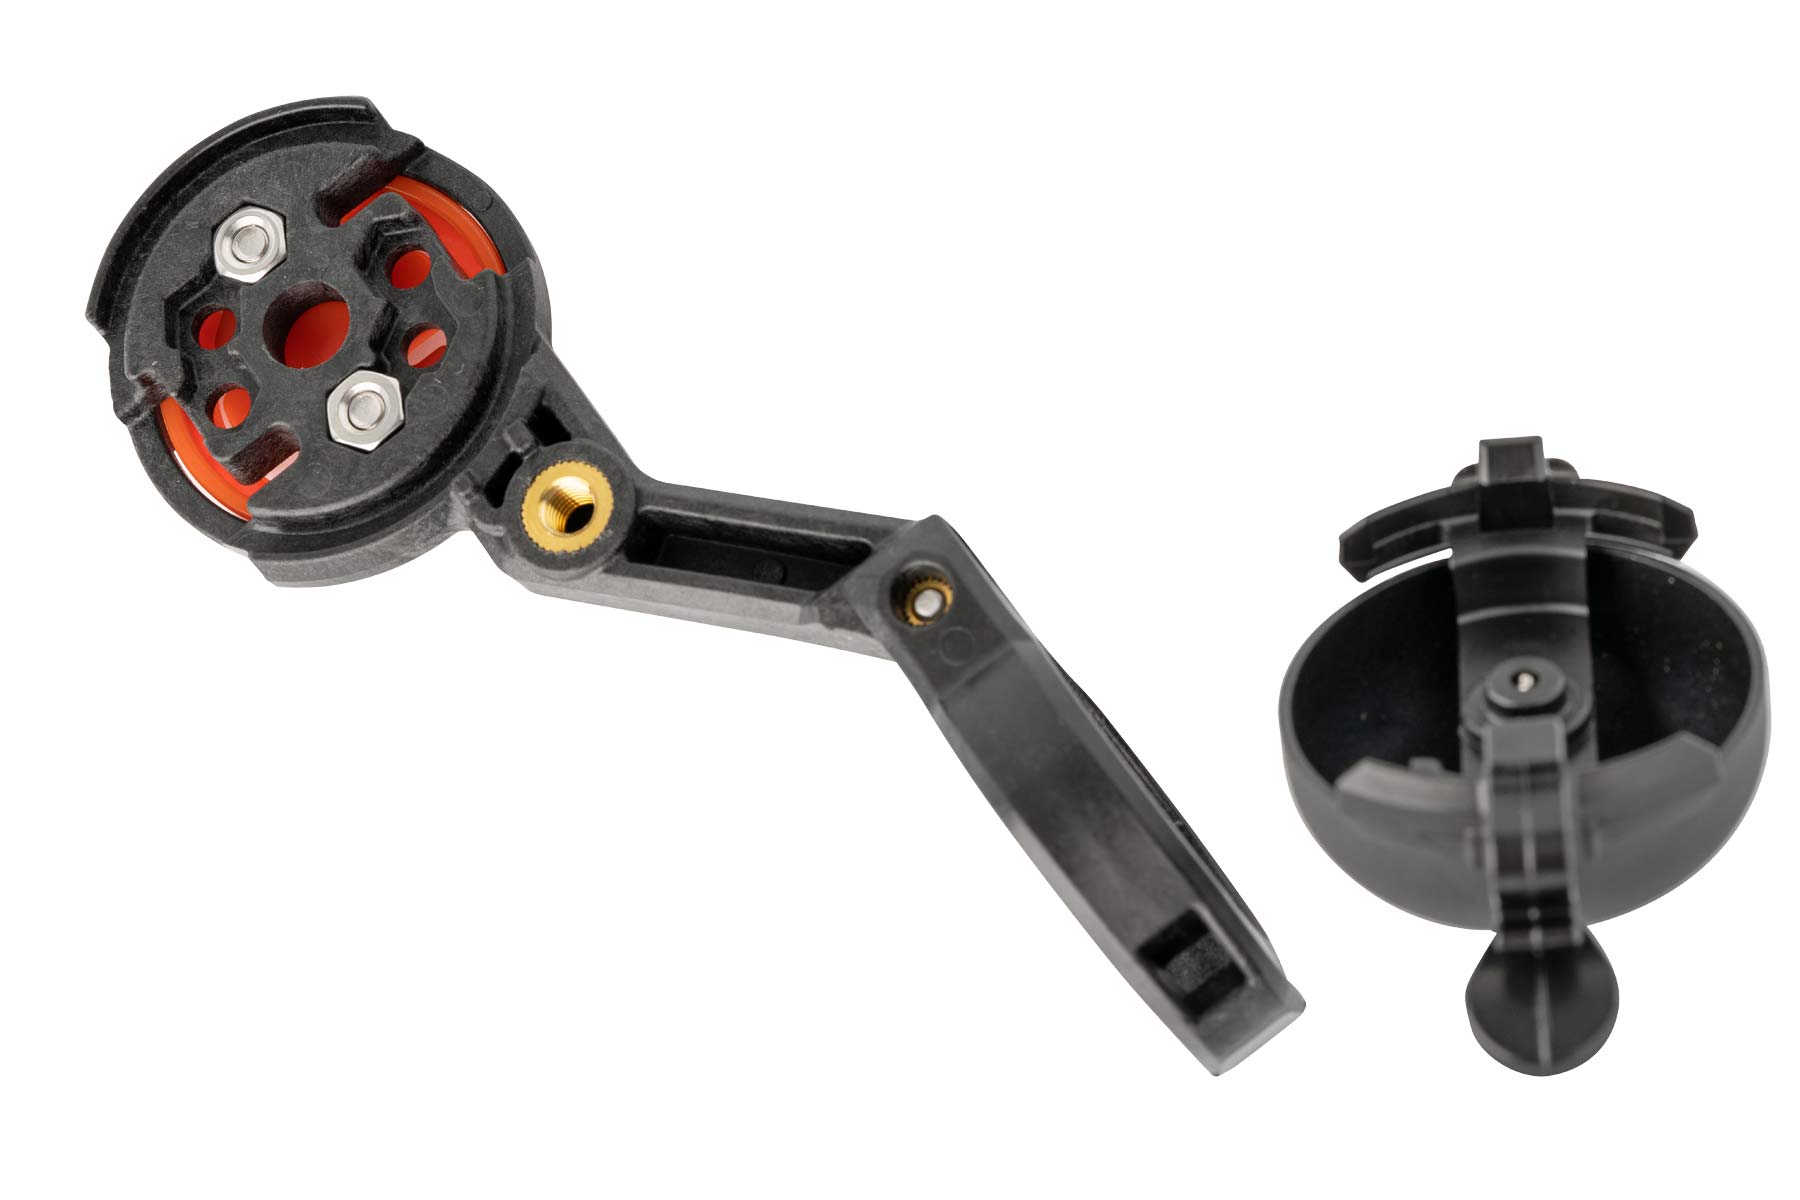 CloseTheGap HideMyBell RaceDay carbon GPS mount bike bell, lightweight carbon cycling computer out-front mount with removable bell